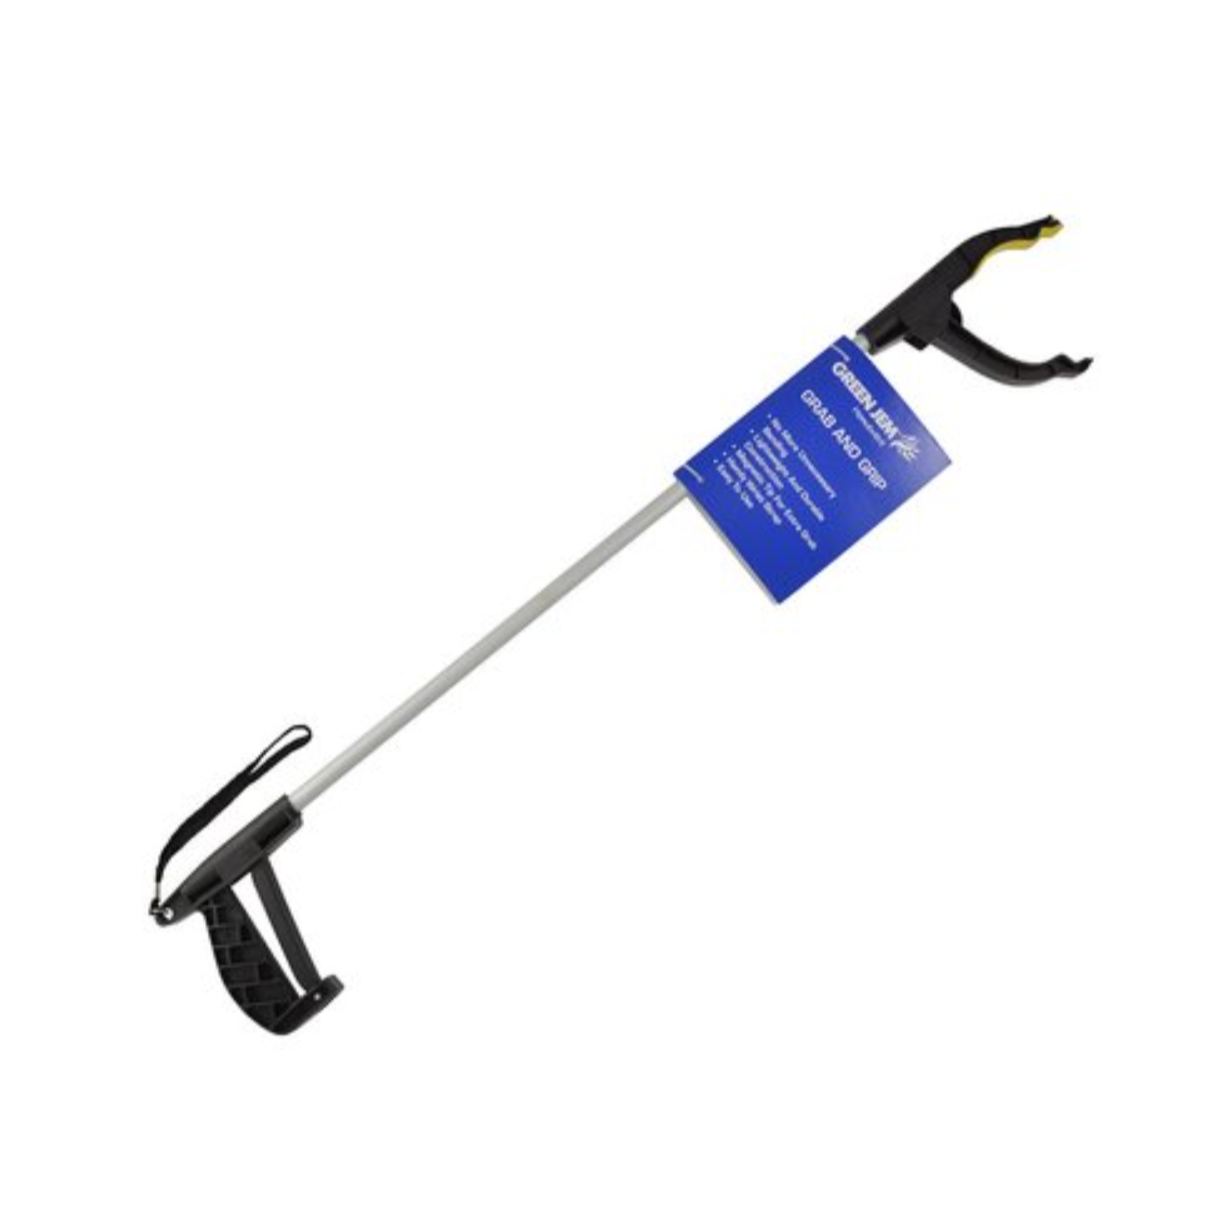 Grab and Grip Litter Picker